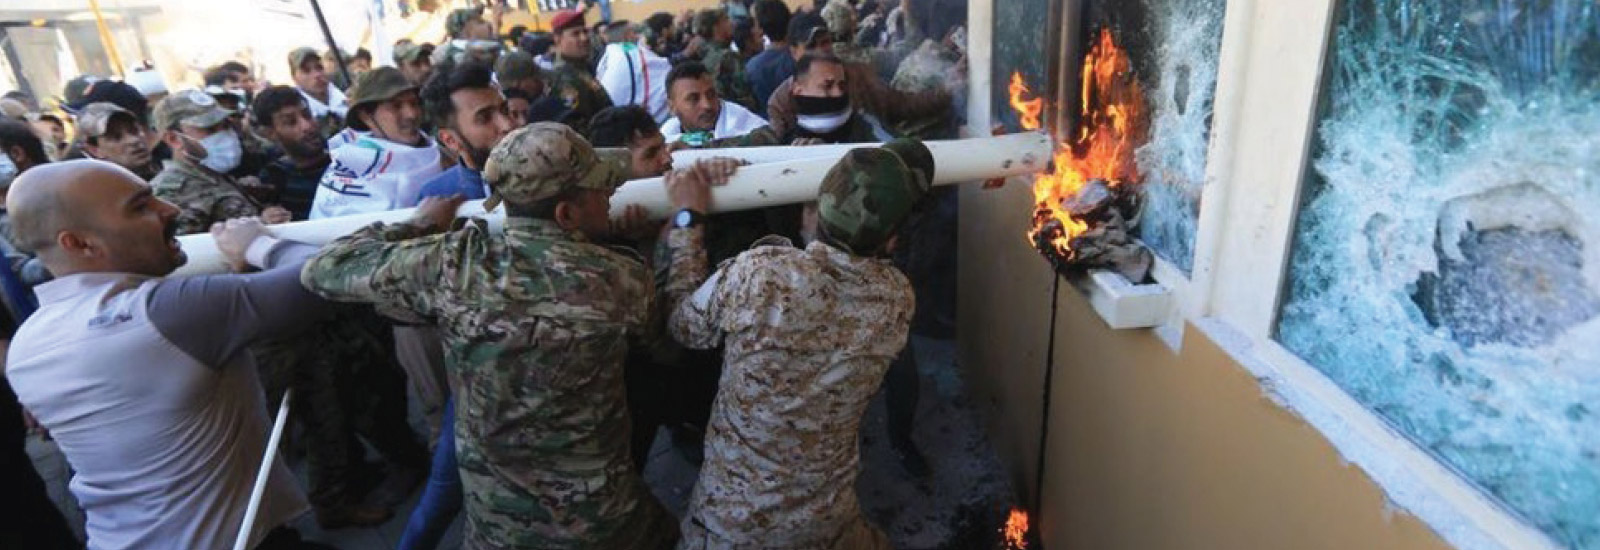 Image of large group of men attempting forced entry with objects and fire.